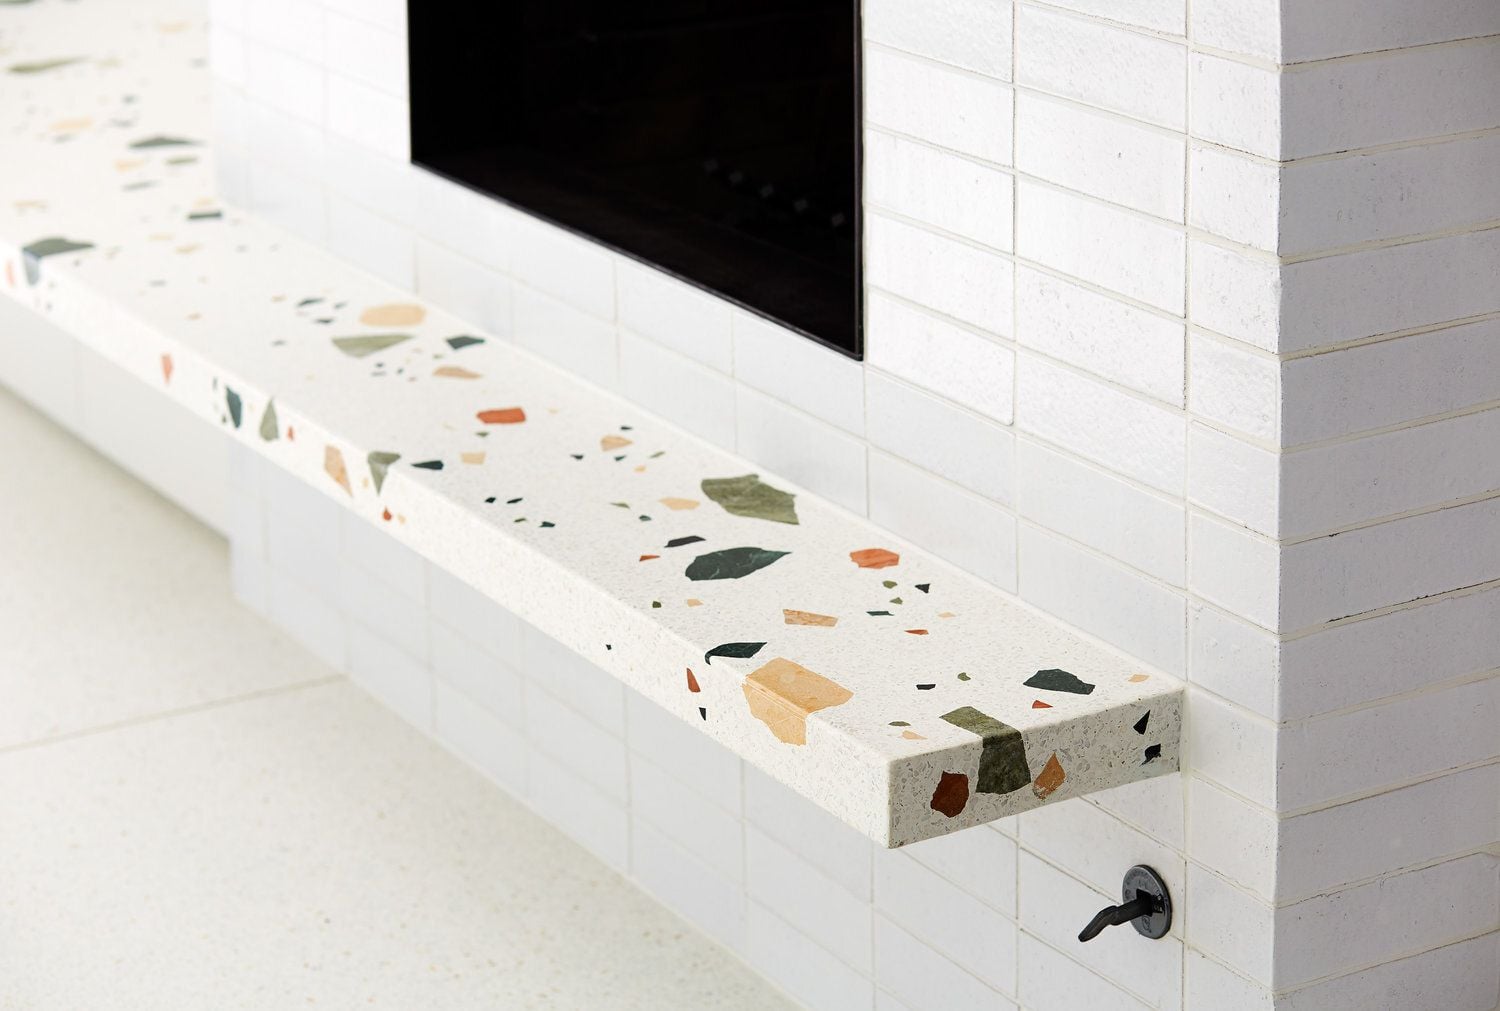 Terrazzo tile is super fun at first glance, but unfortunately it's a look that's destined to keep coming in and out of style.